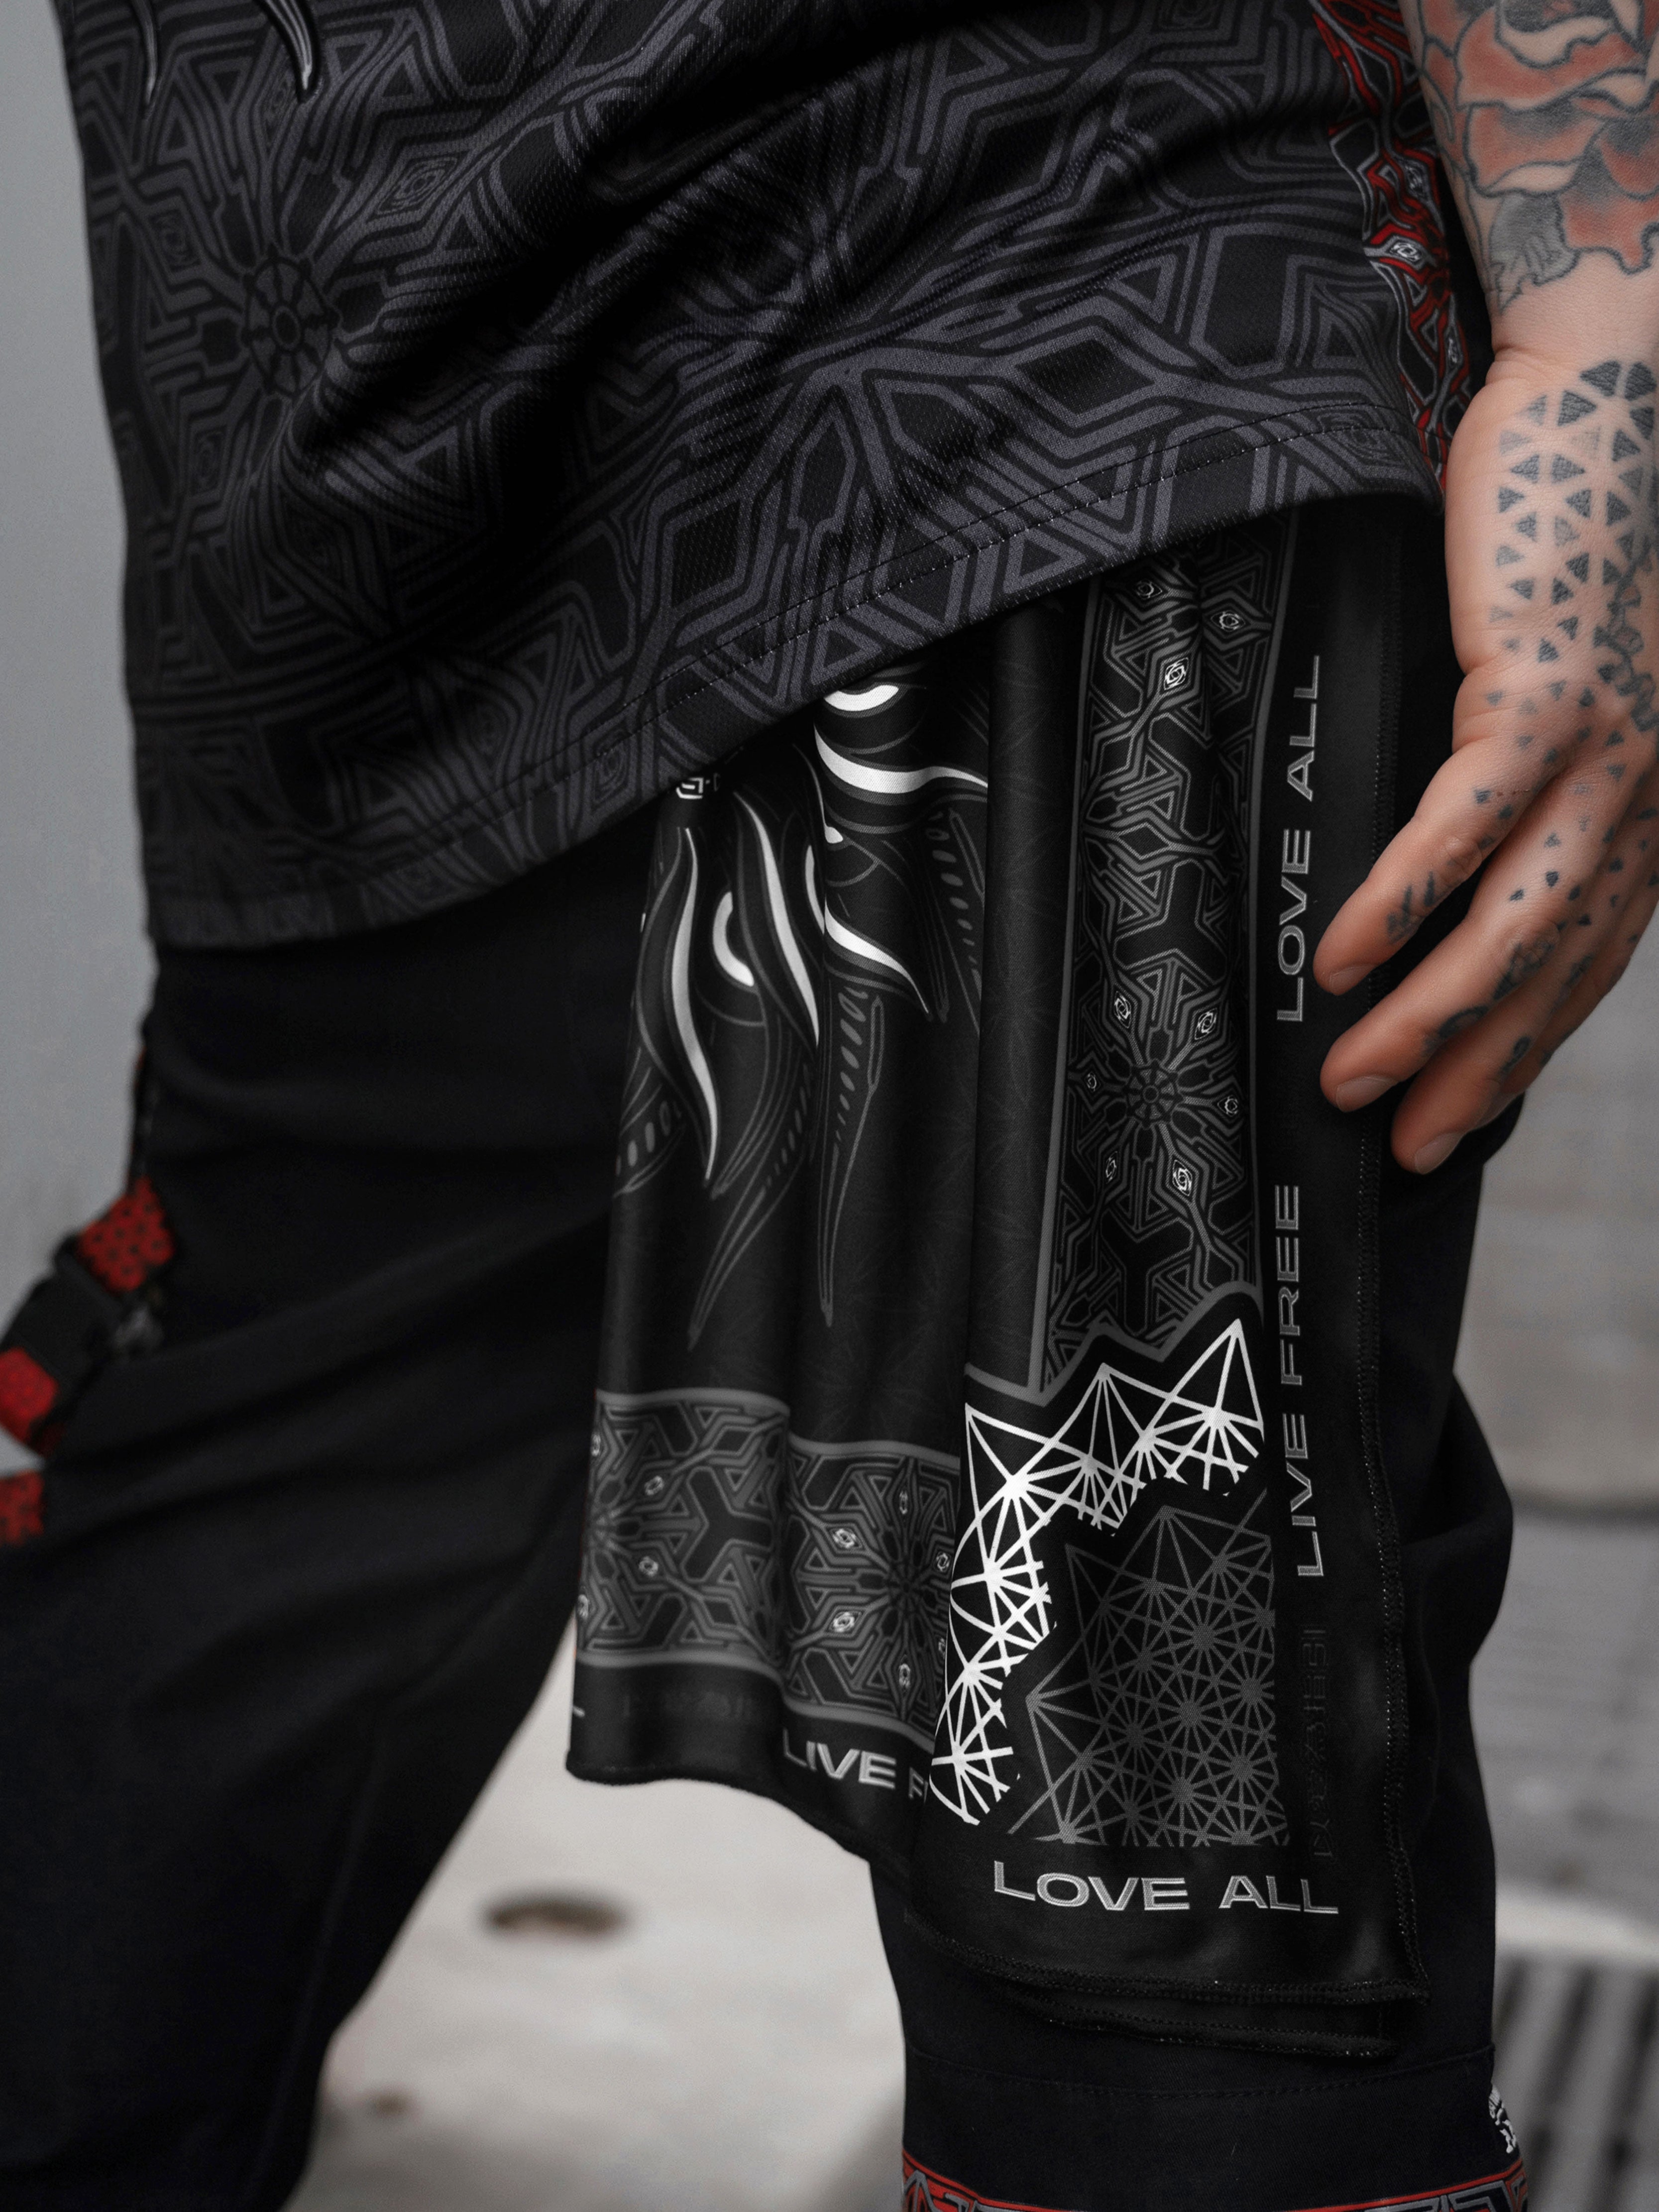 PRE-ORDER ✦ PROTECTED BY INTENT ✦ Slate Double-sided Bandana Coming Soon 